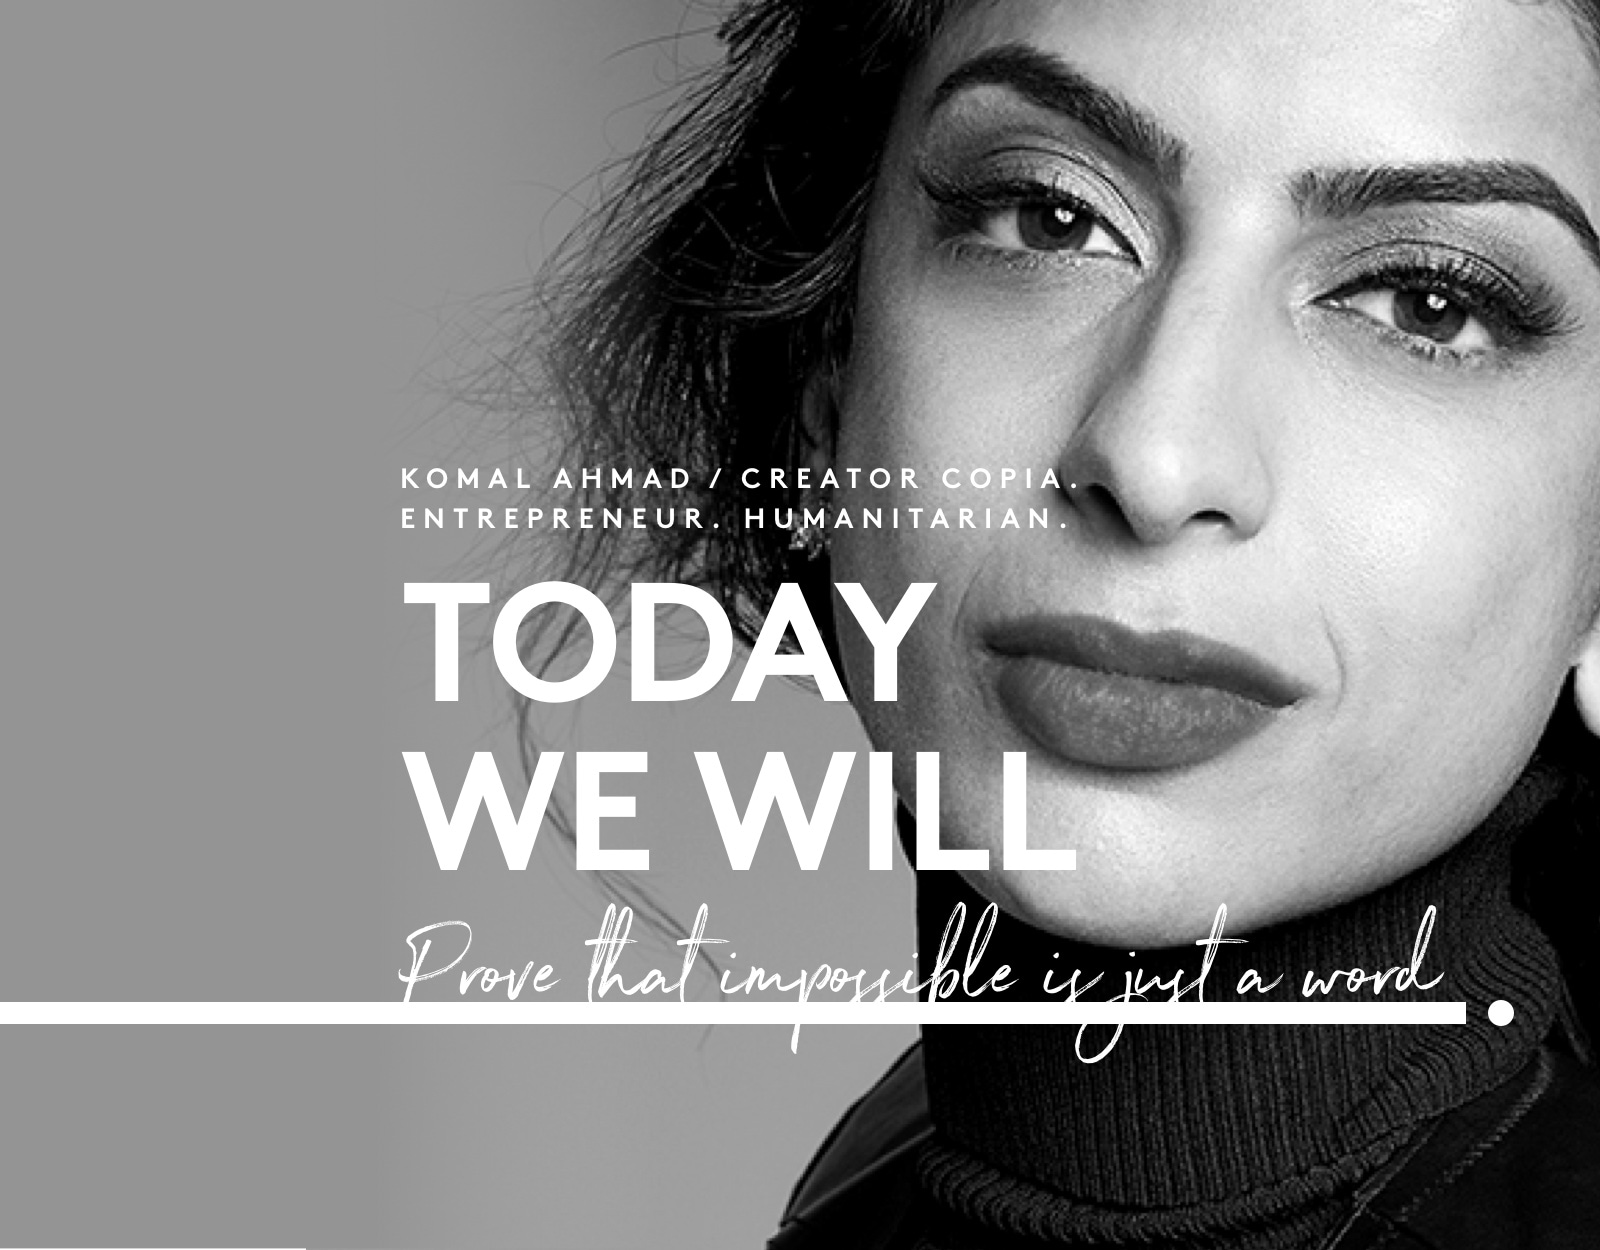 Komal Ahmad / Creator copia. entrepreneur. humanitarian.  TODAY WE WILL Prove that impossible is just a word